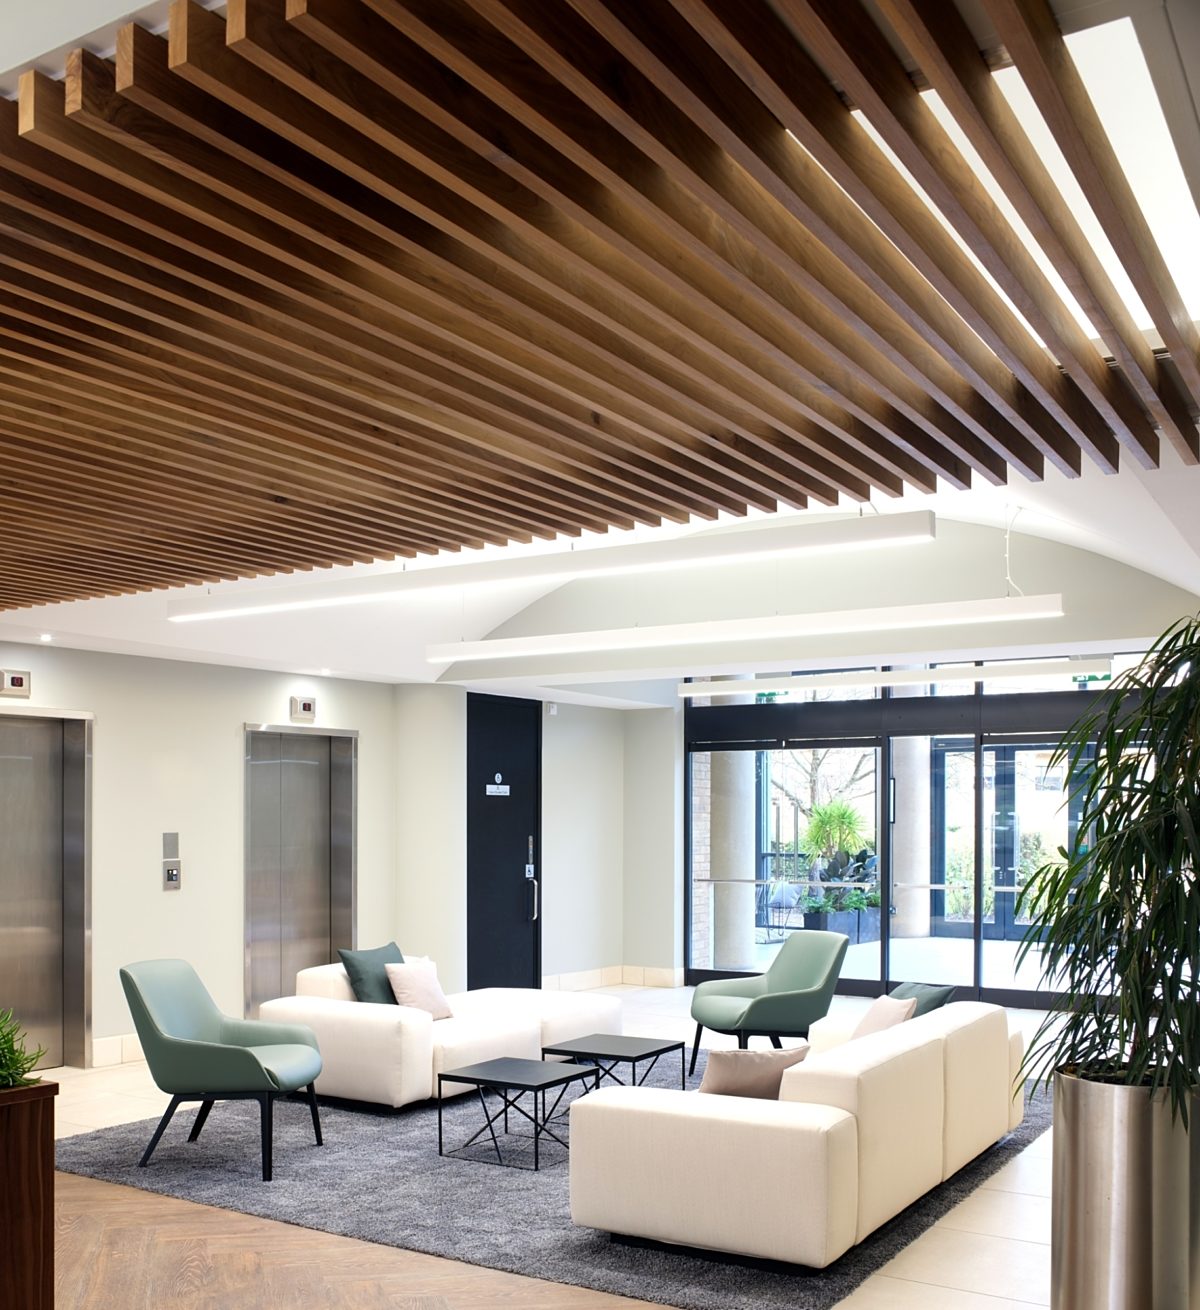 Timber ceiling for advanced acoustics in modern office